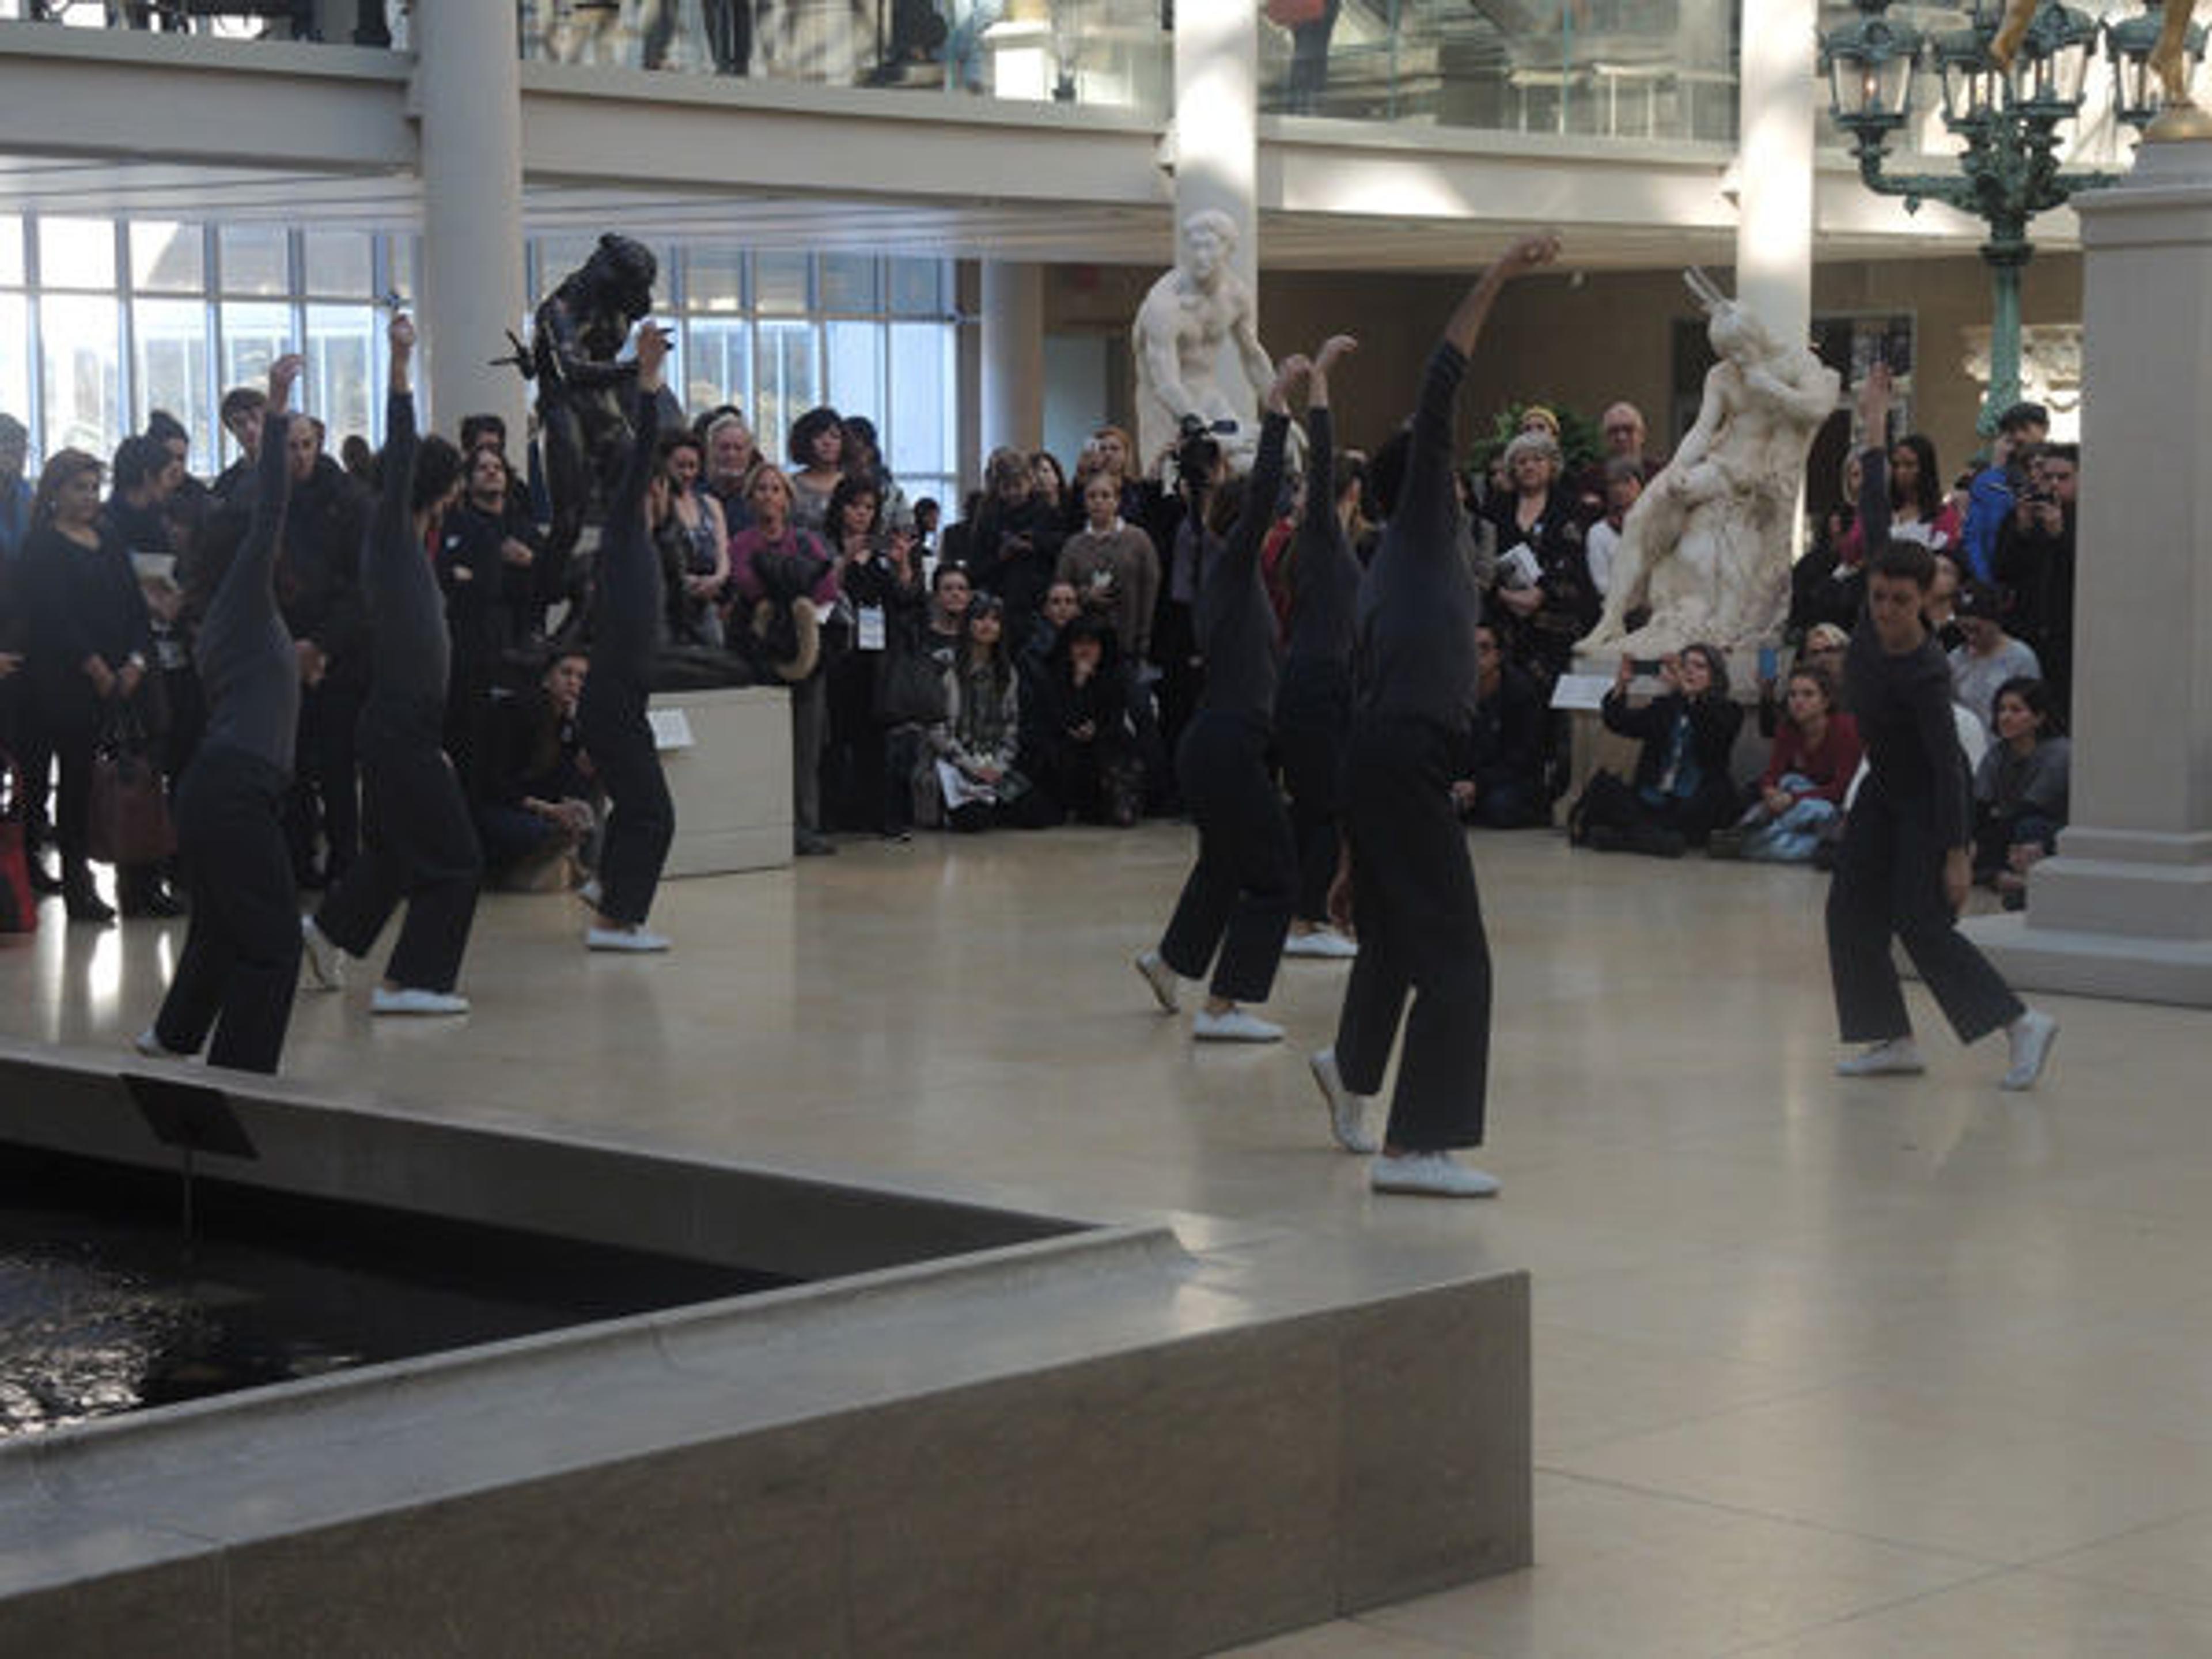 Trisha Brown Dance Company pop-up performance in The Charles Engelhard Court, held in conjunction with the ISPA New York Congress 2015. All photos courtesy of Met Museum Presents